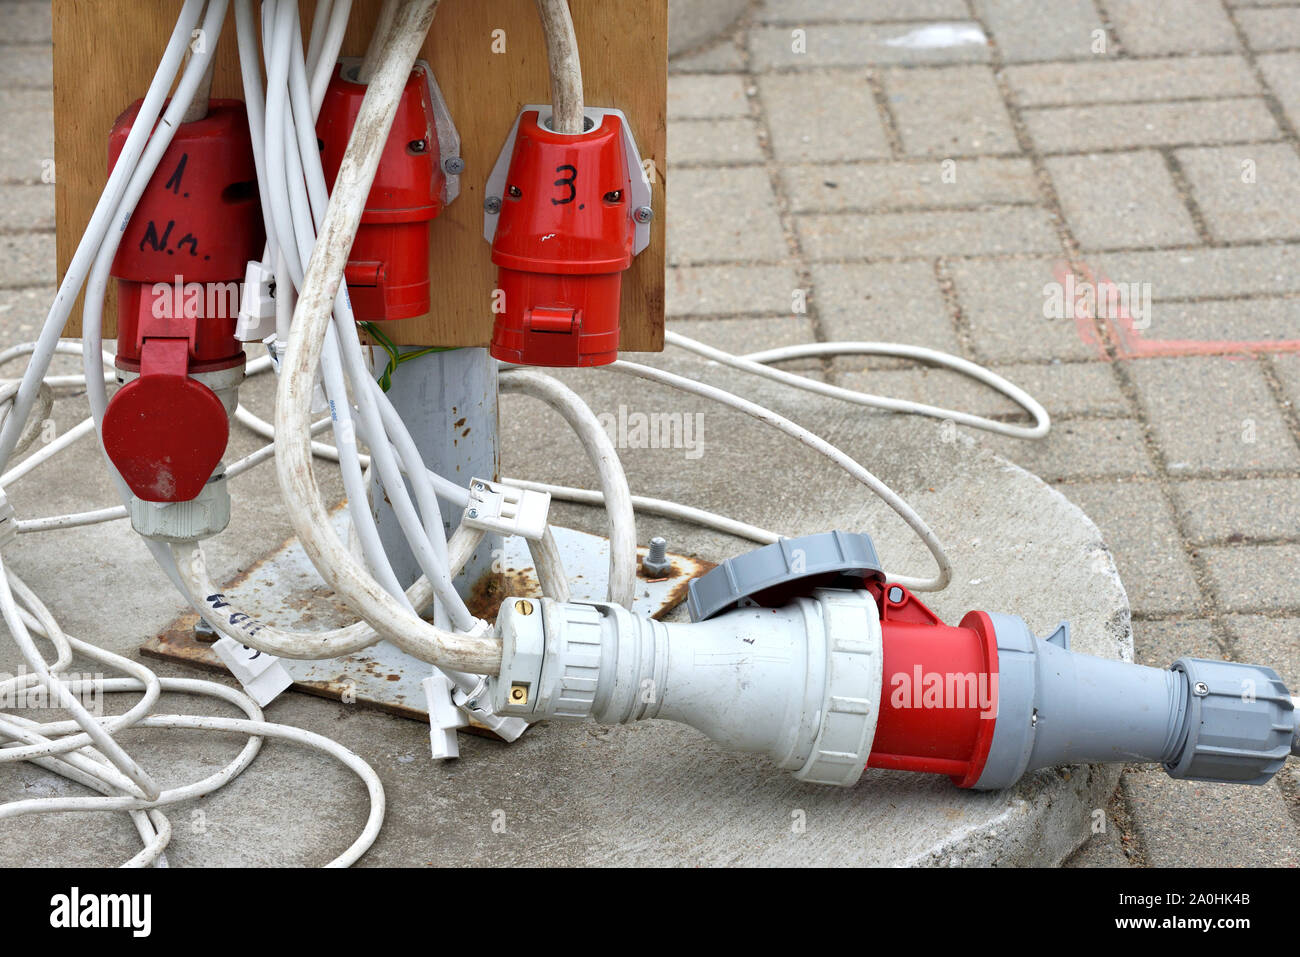 Electrical extension cord with plugs, extension lead. Electric extension cord on ground Stock Photo